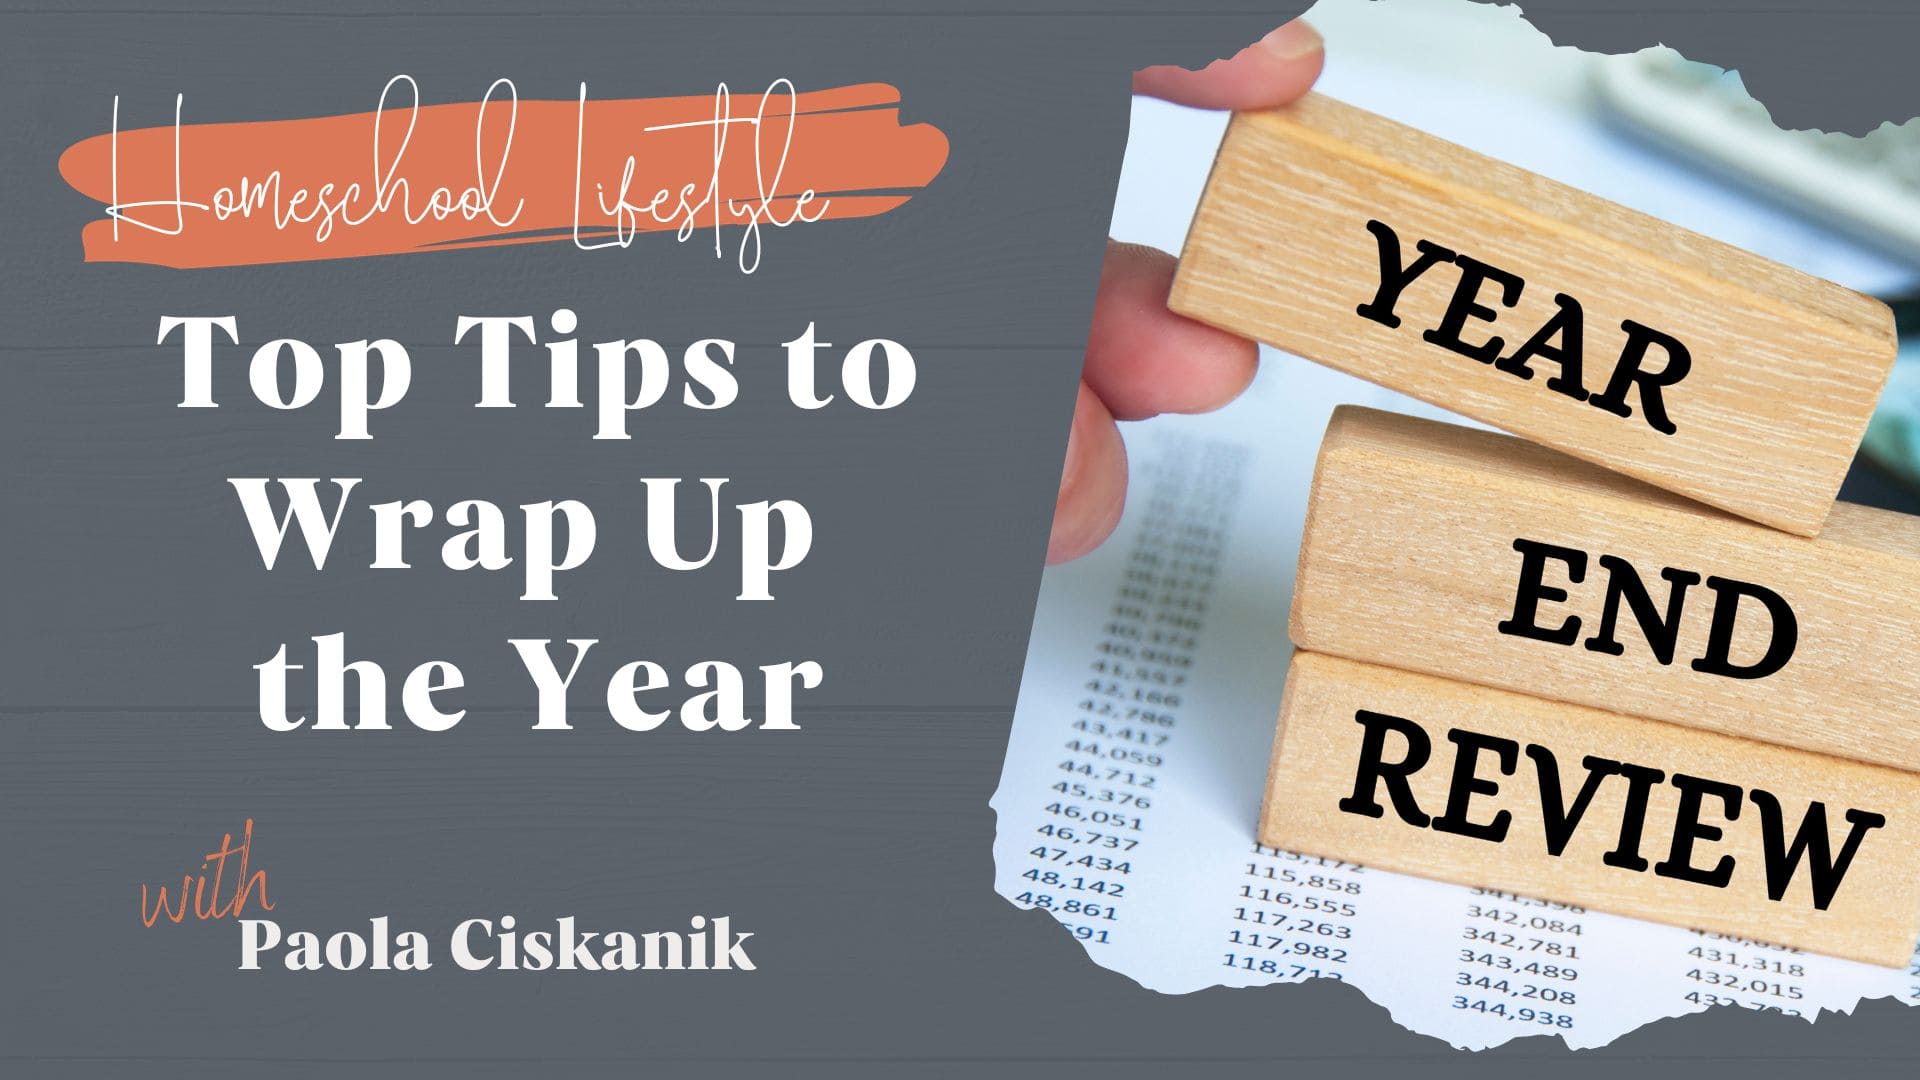 Top Tips to Wrap Up the Year